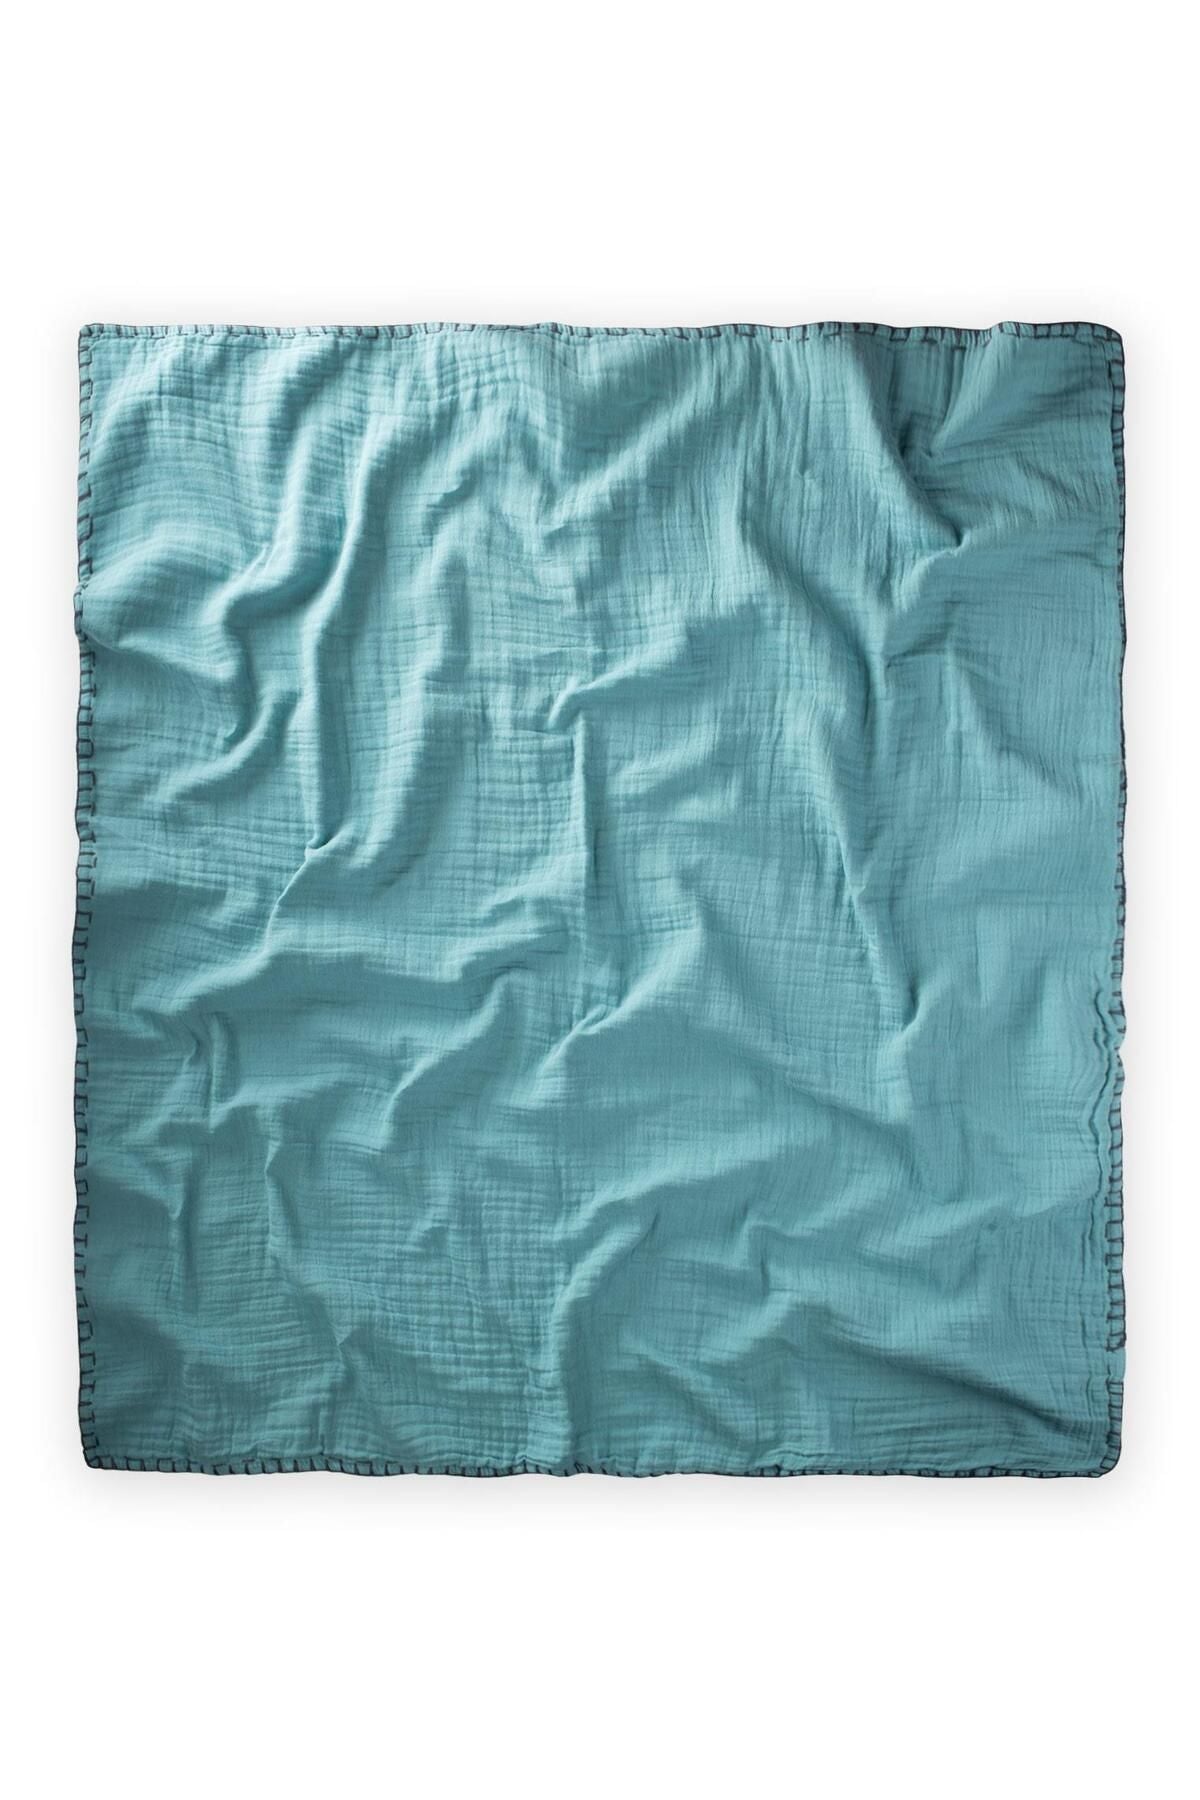 Muslin double -sided baby blanket (washed) 100x100 cm smoked turquoise turquoise